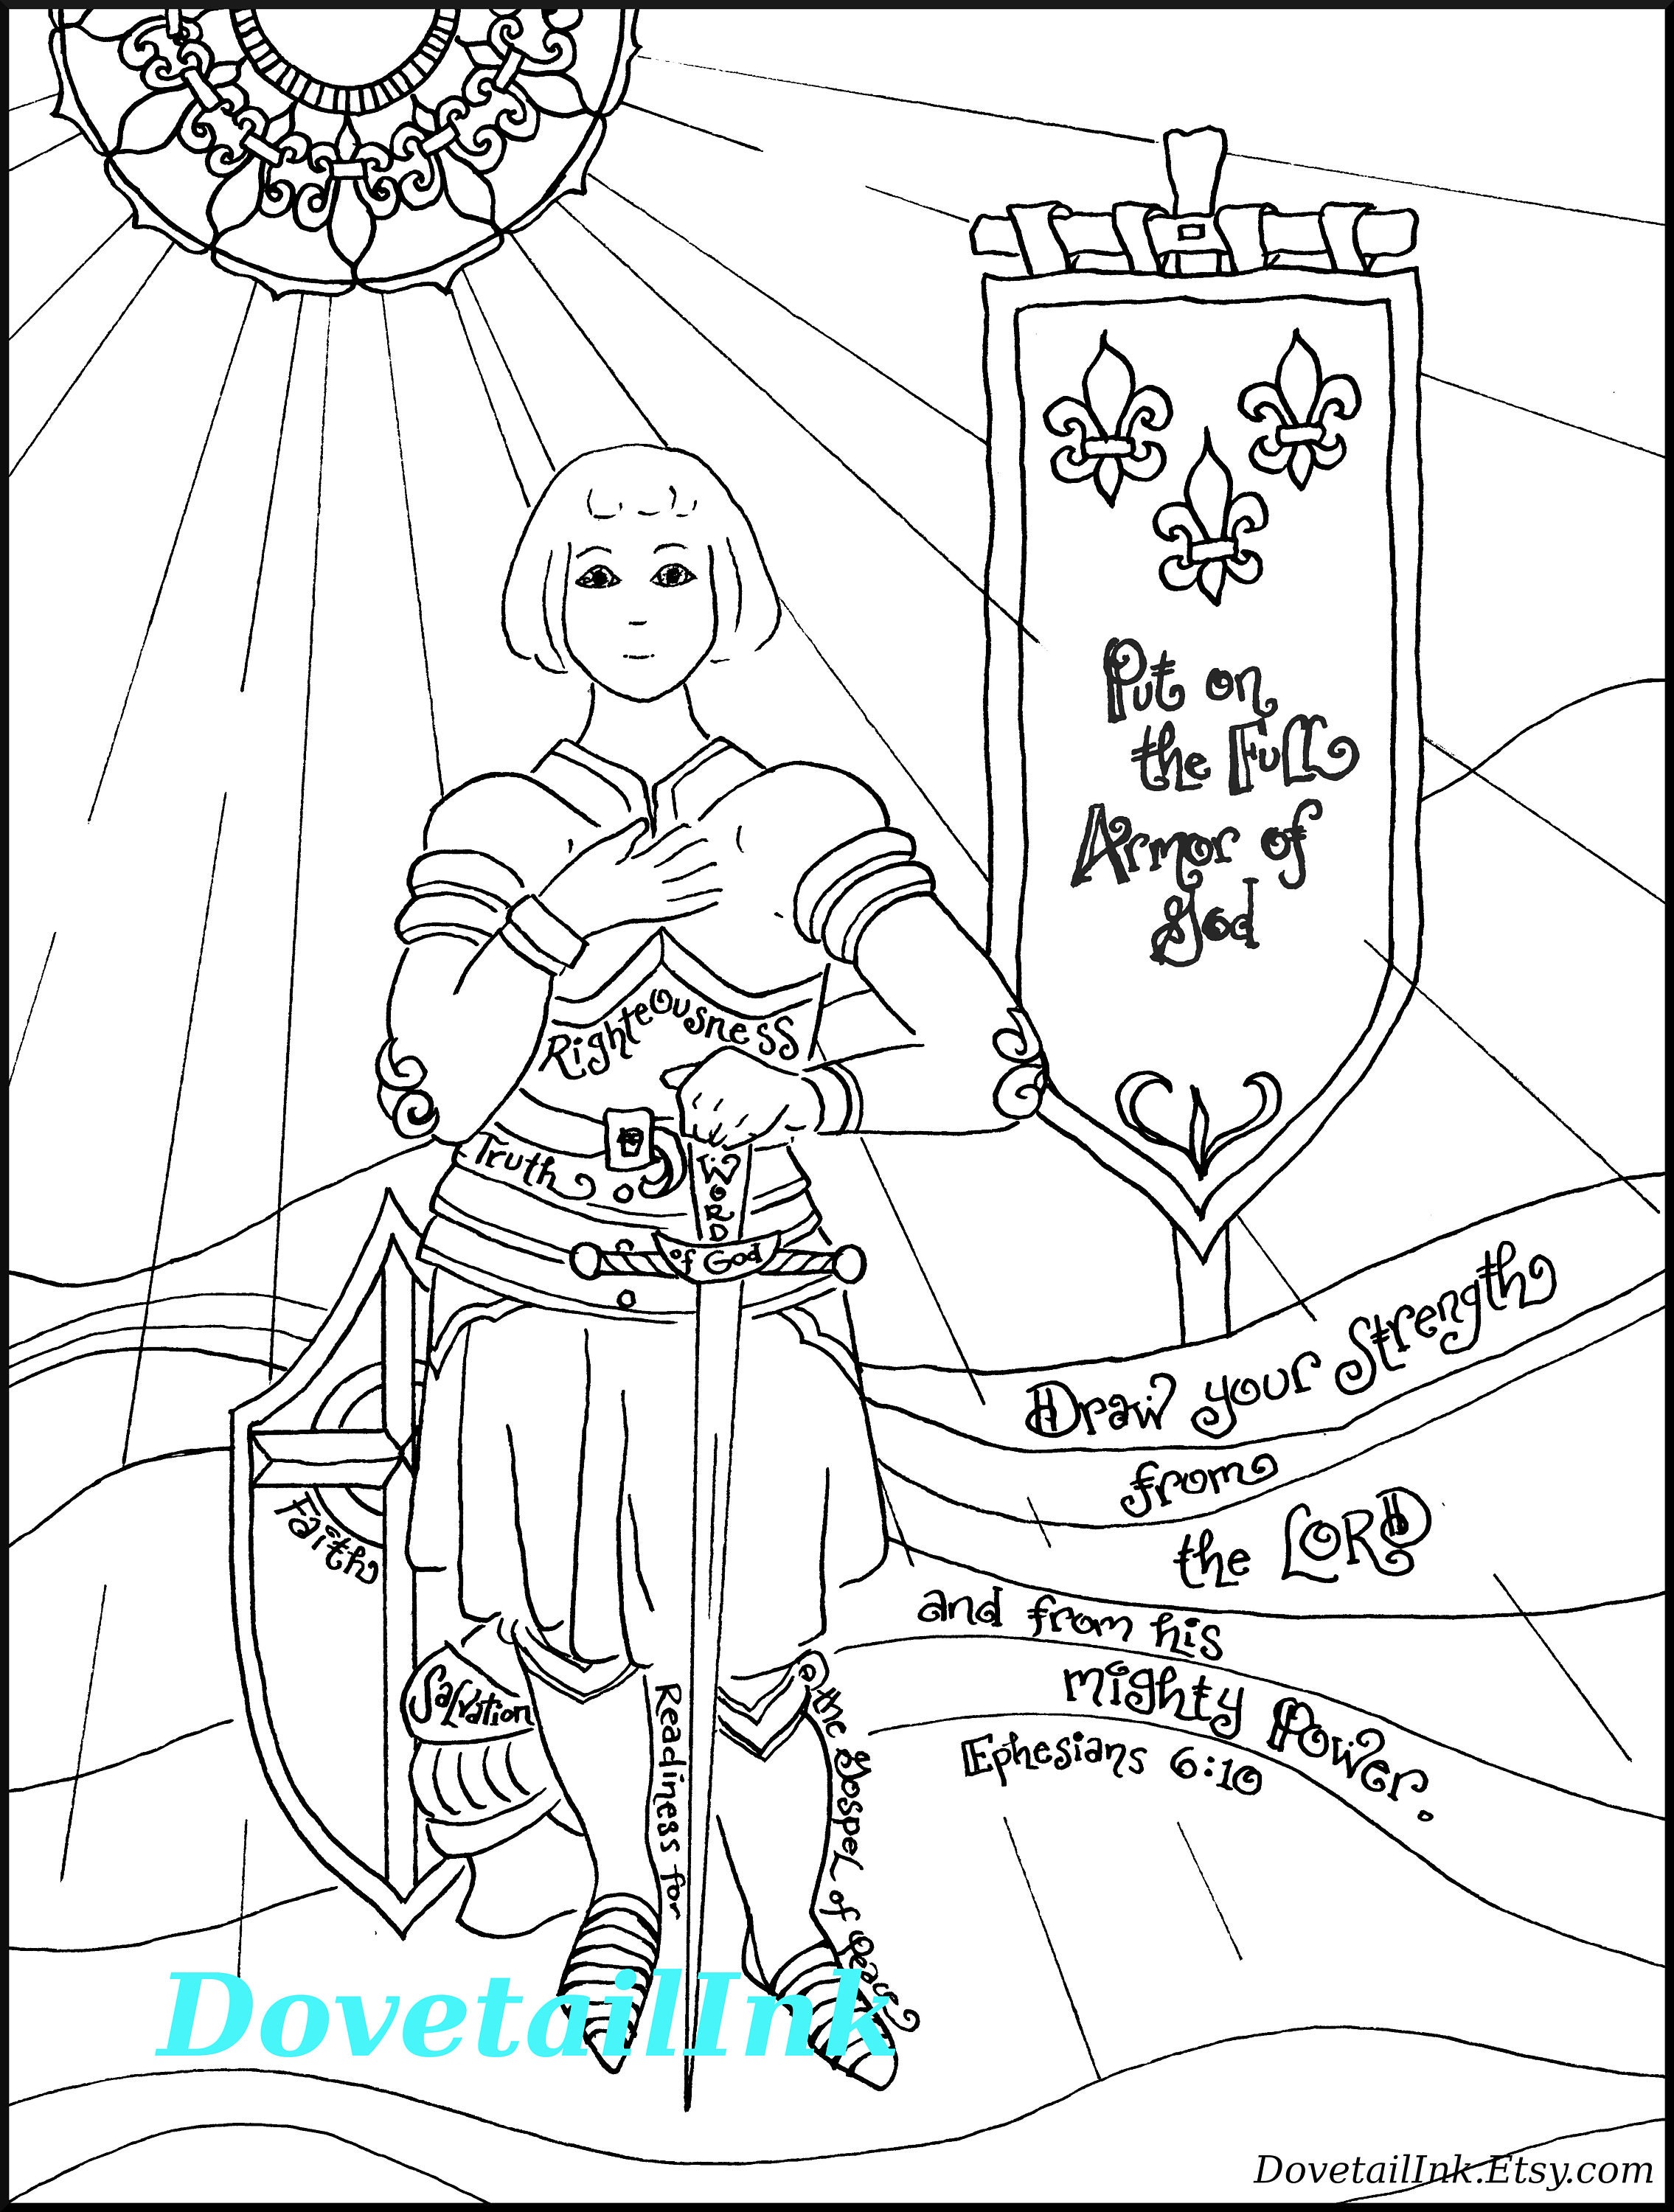 knights in armour coloring pages